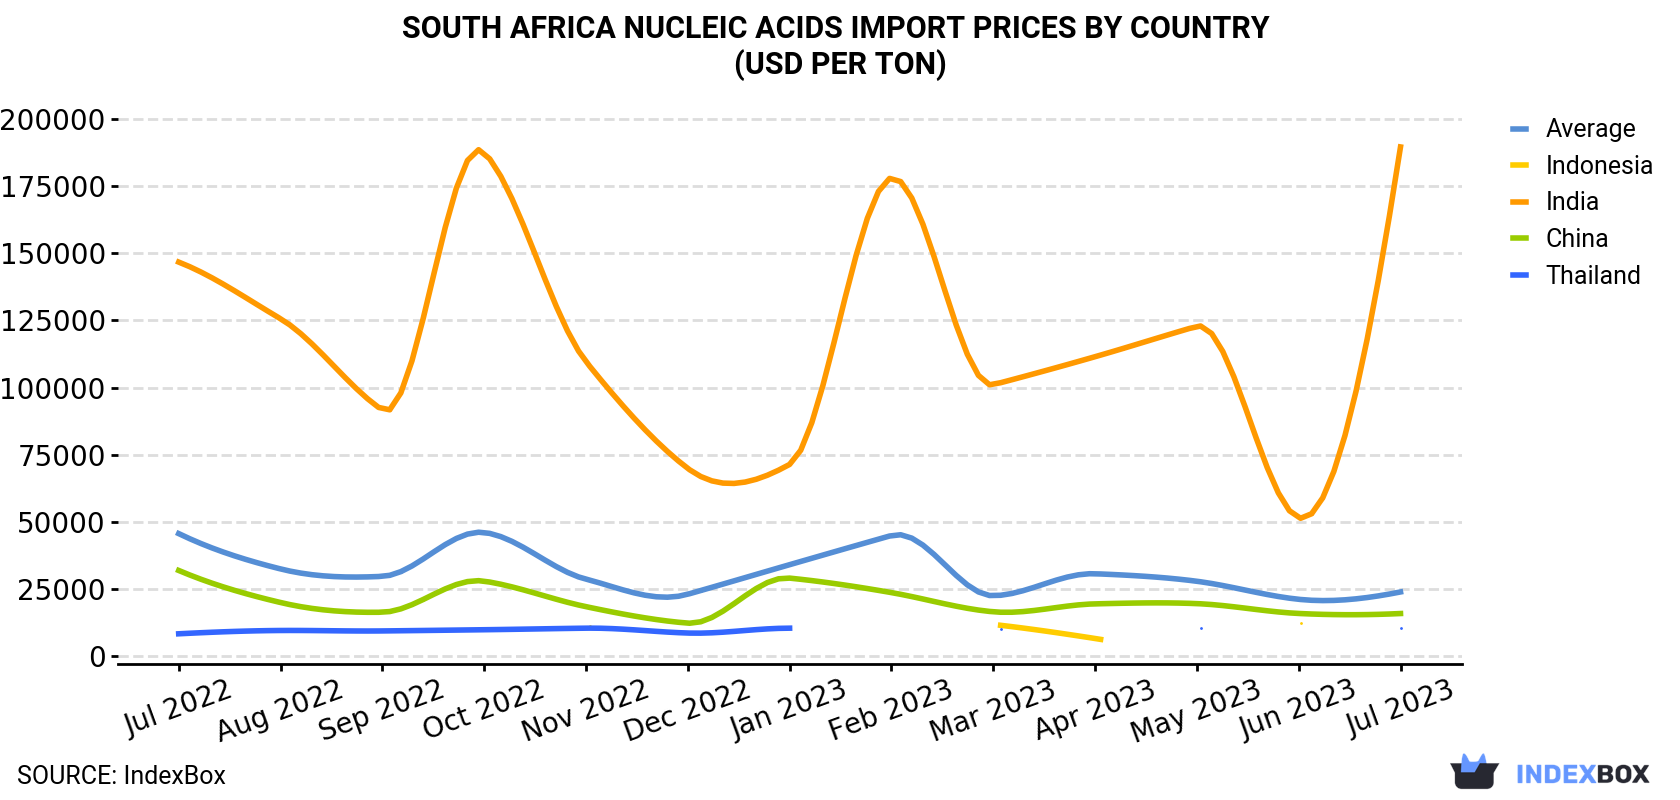 South Africa Nucleic Acids Import Prices By Country (USD Per Ton)